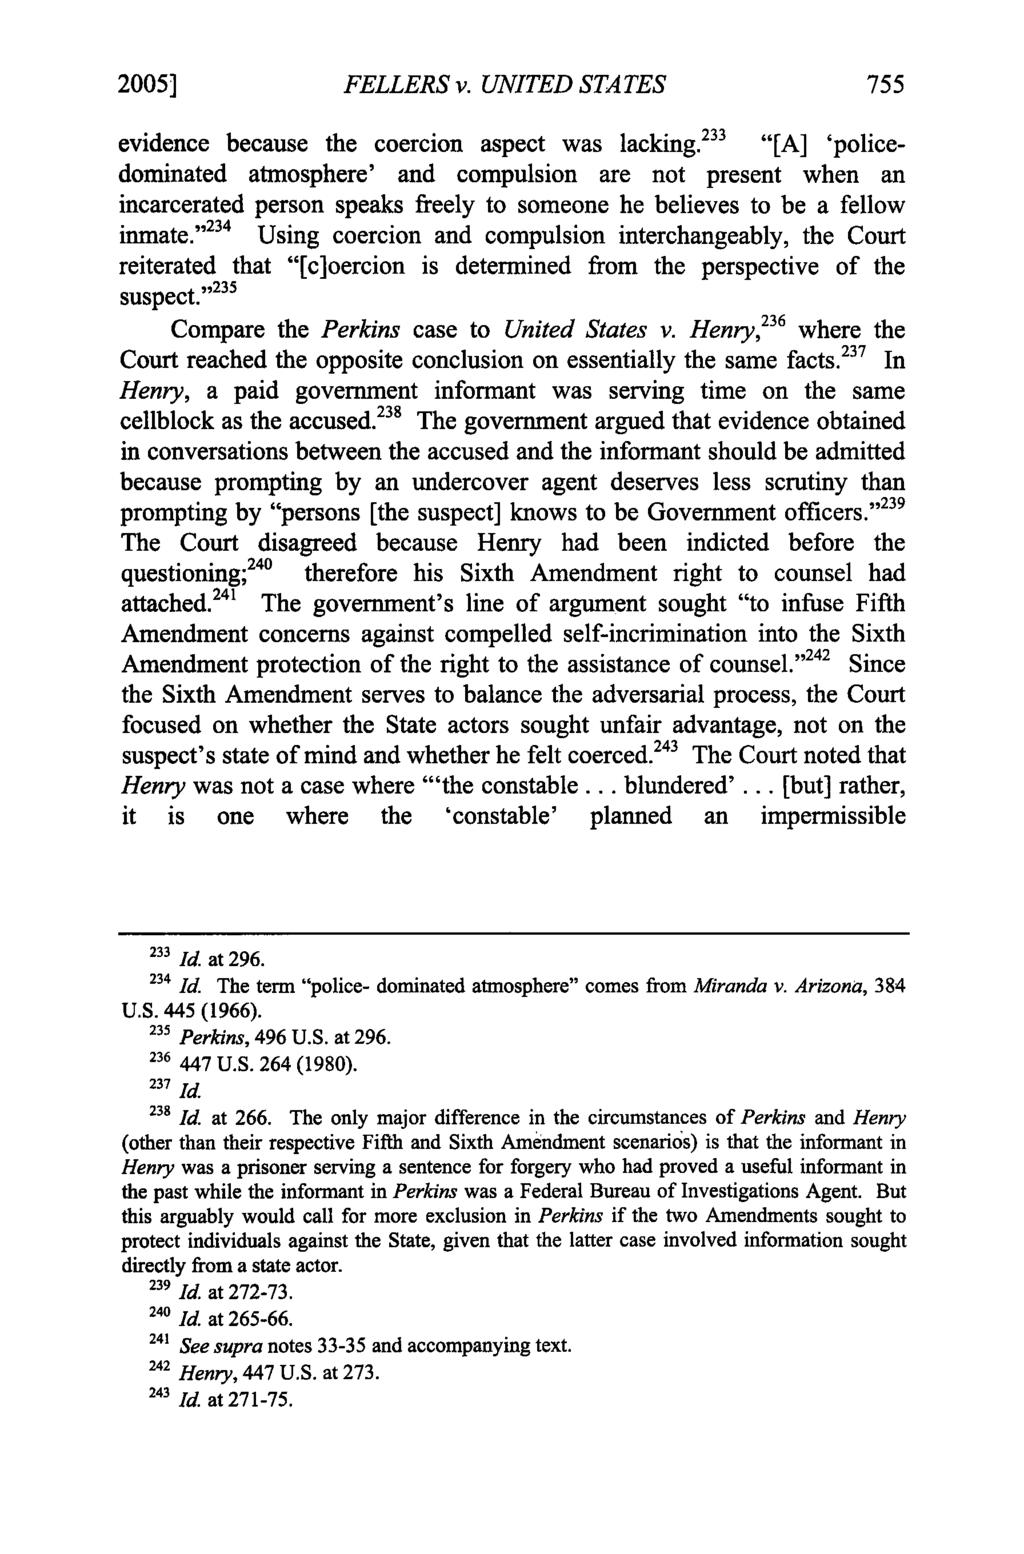 2005] FELLERS v. UNITED STATES evidence because the coercion aspect was lacking.